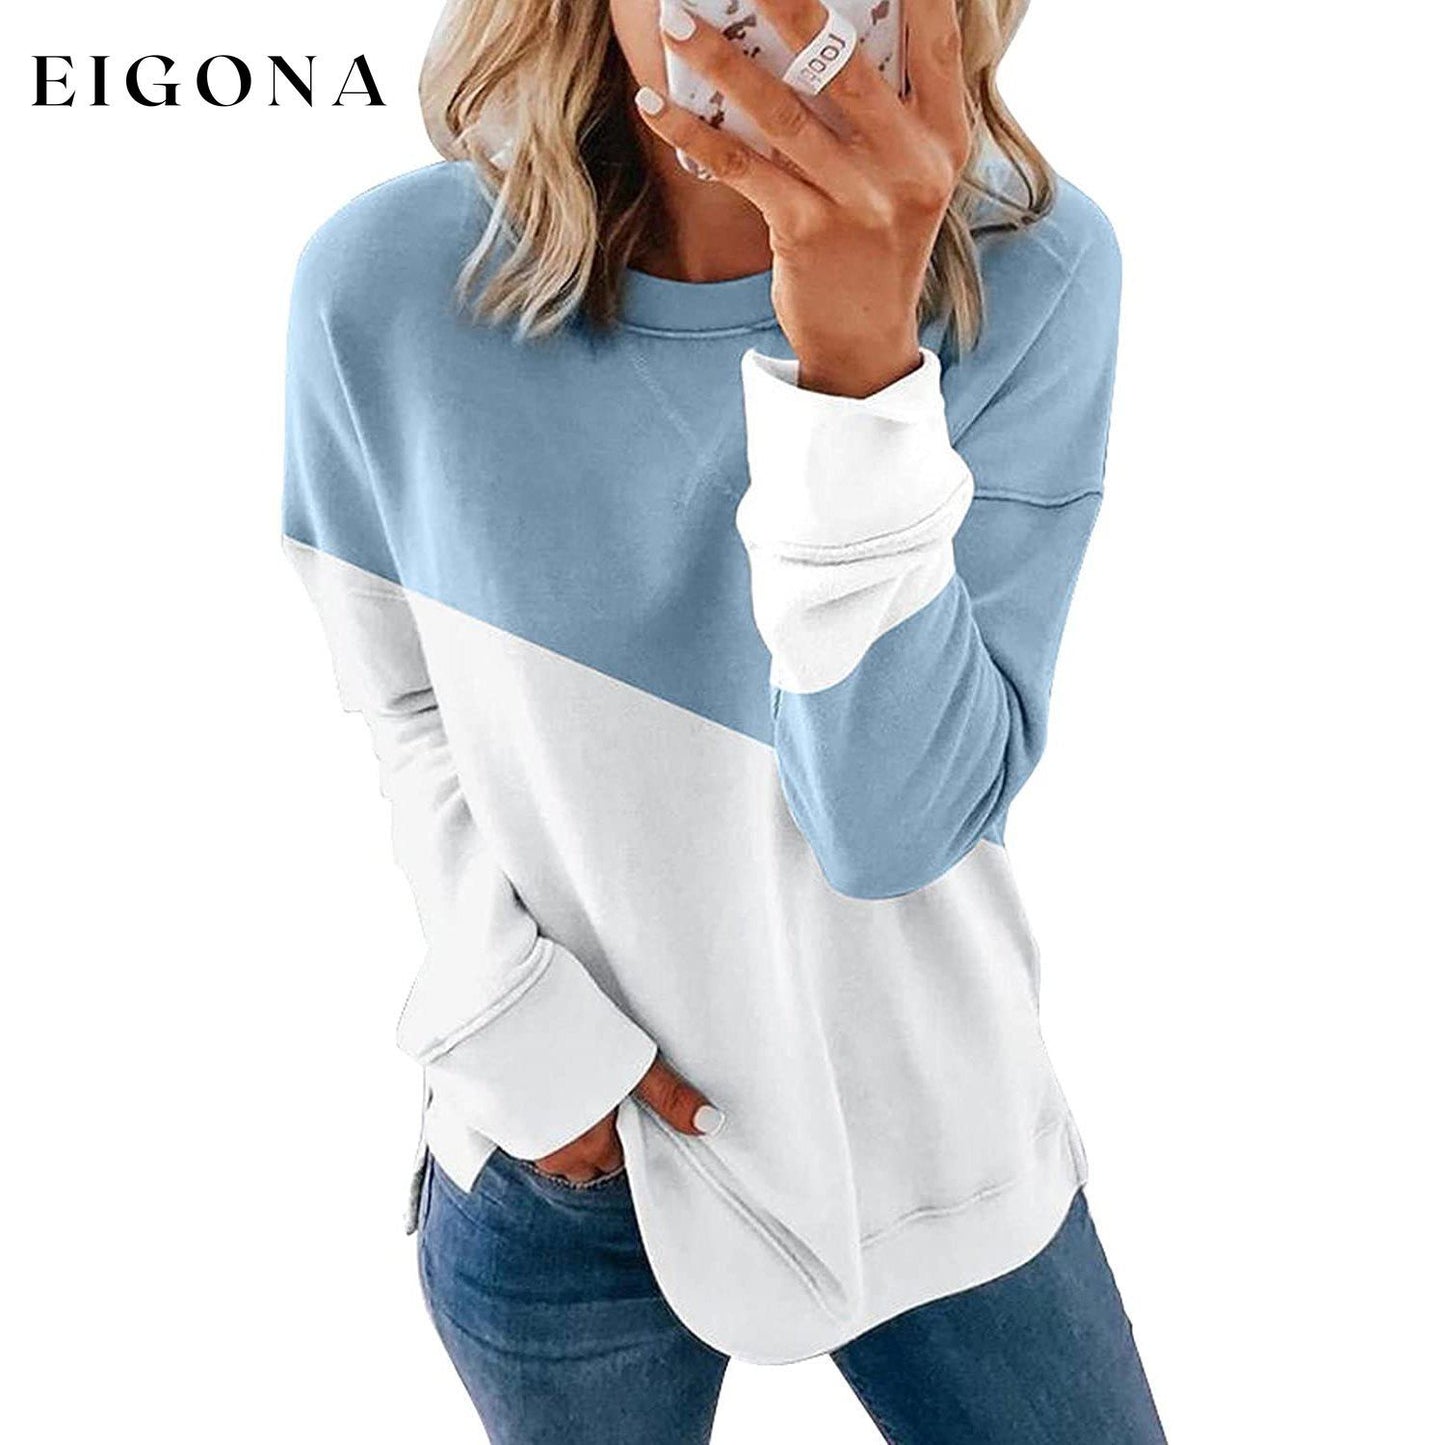 Biucly Women's Casual Round Neck Tie-Dye Sweatshirt Sky Blue __stock:500 clothes refund_fee:800 tops